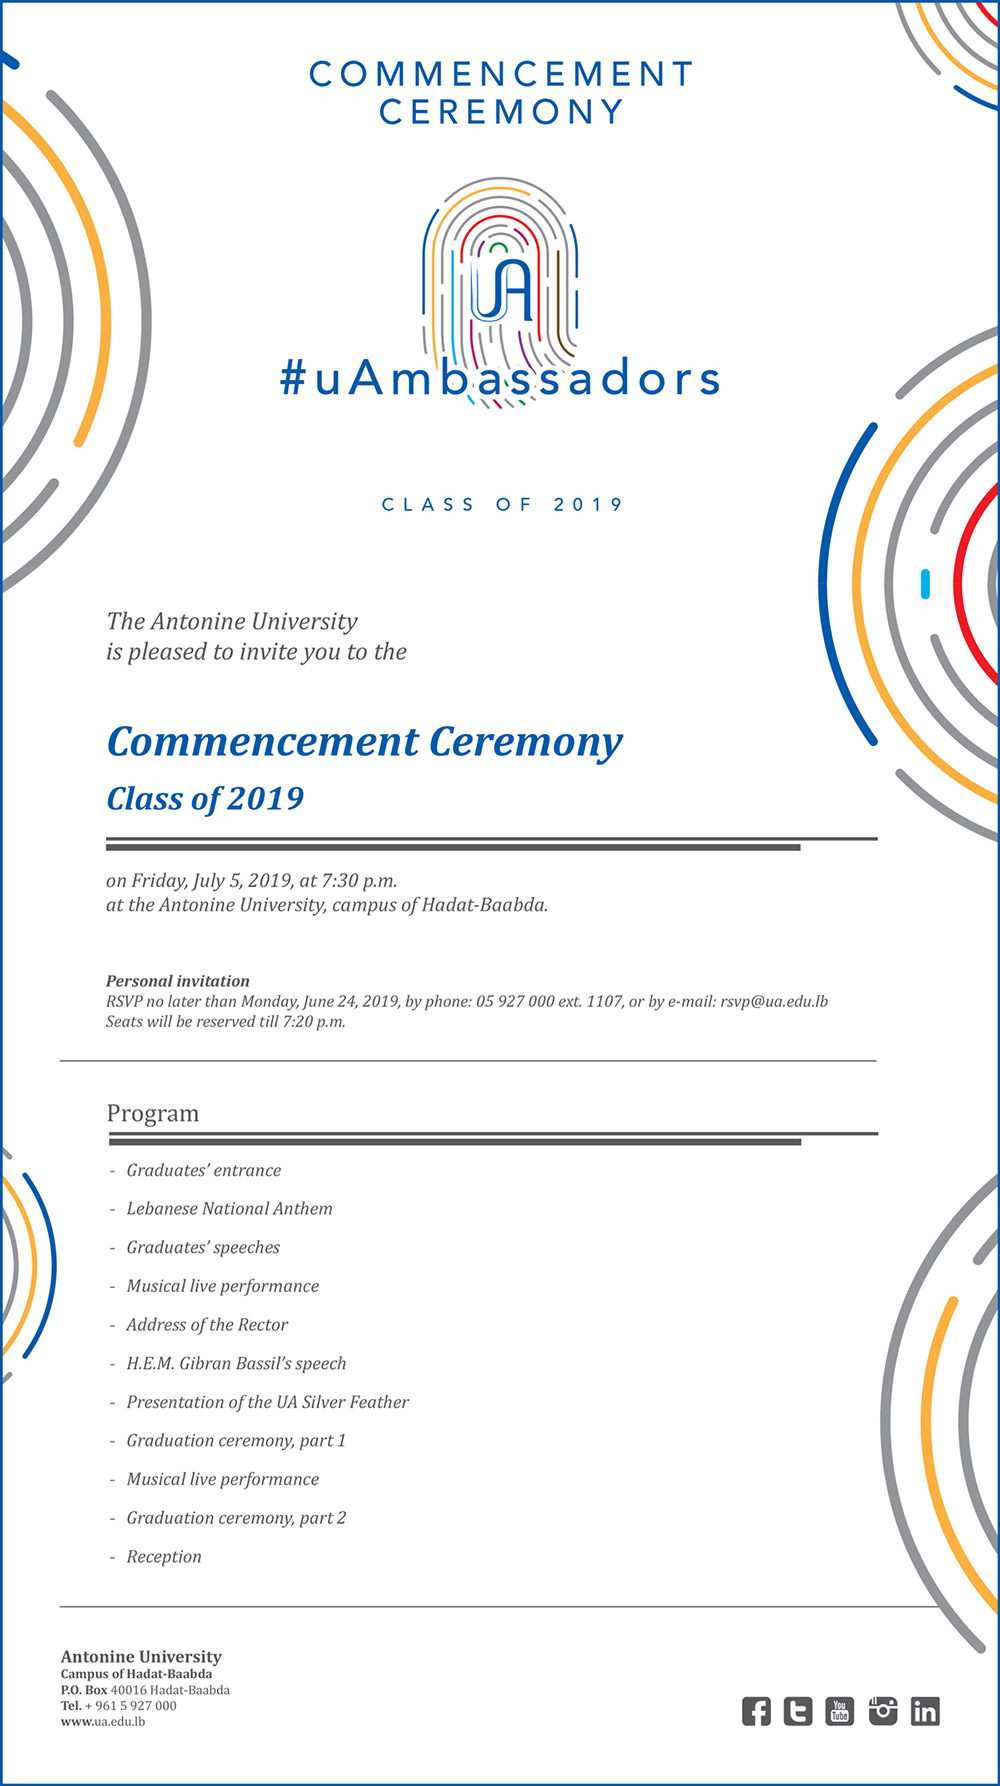 Commencement Ceremony | Class of 2019